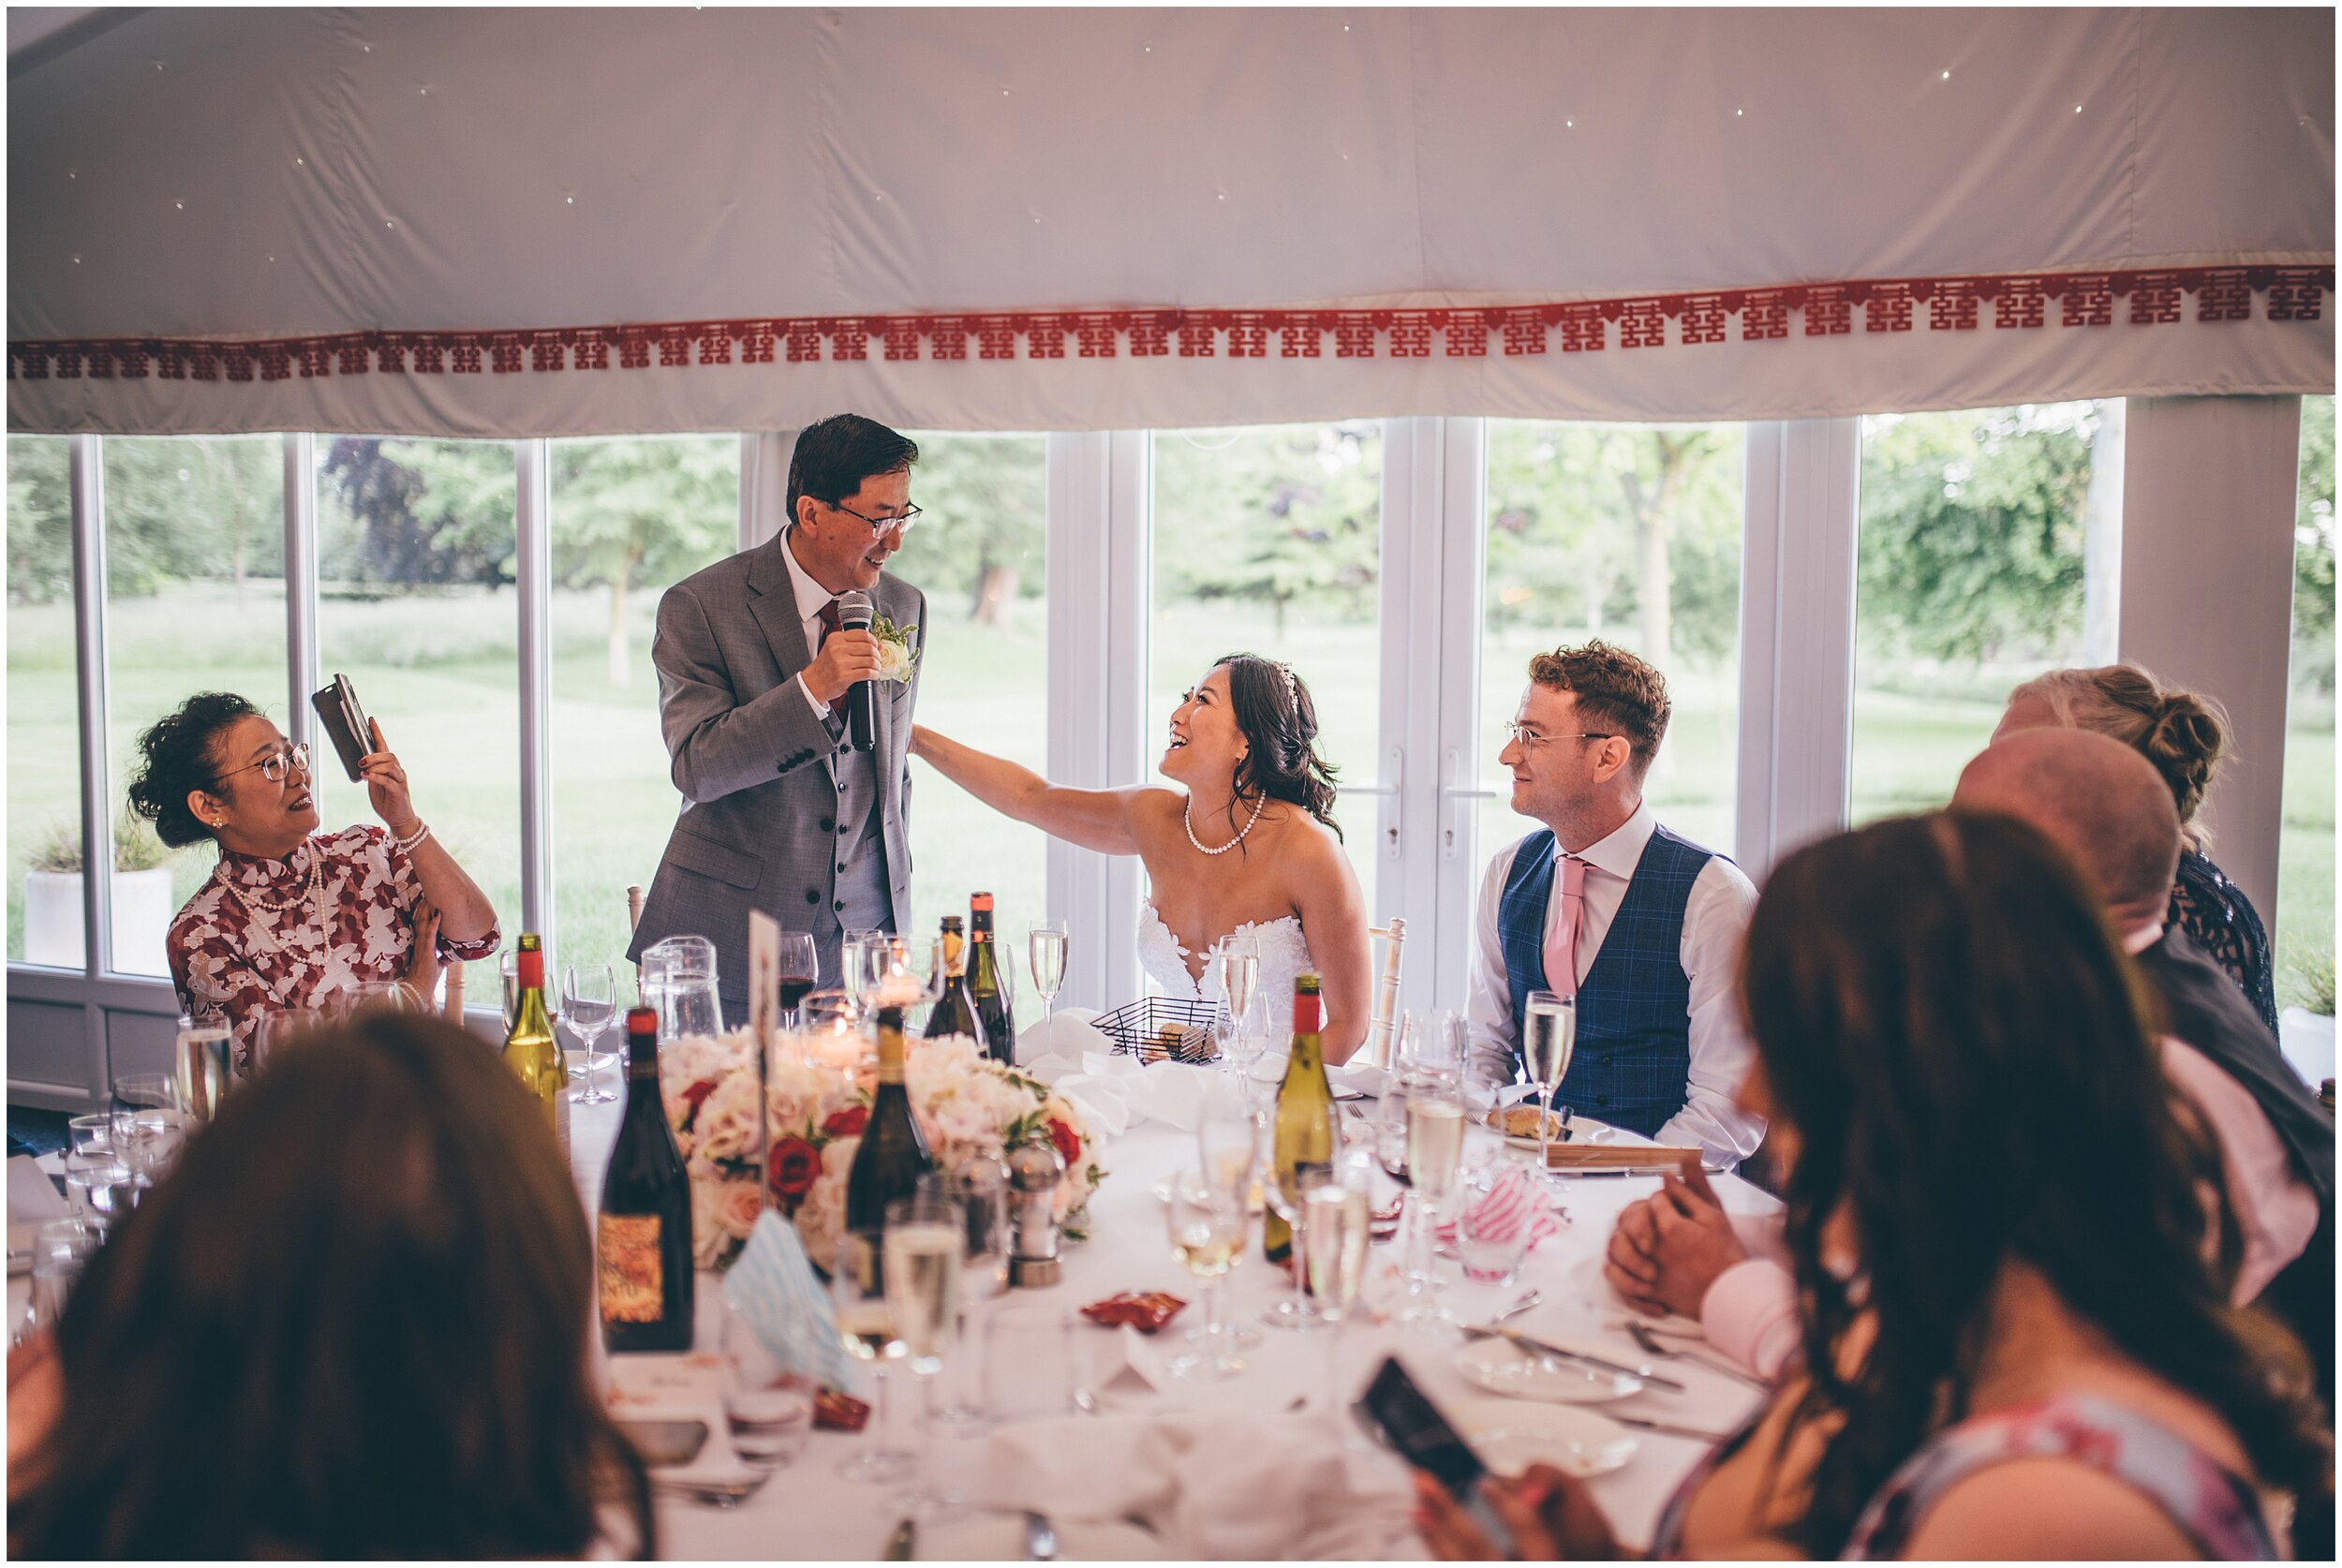 Father of the bride does his wedding speech at Cheshire wedding venue.